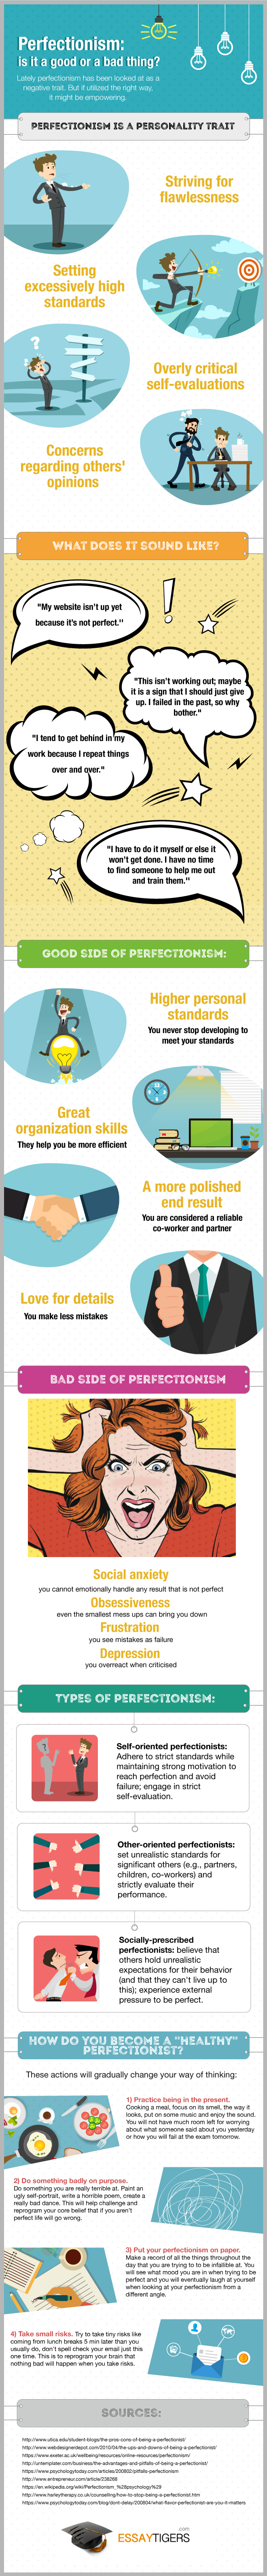 perfectionism definition